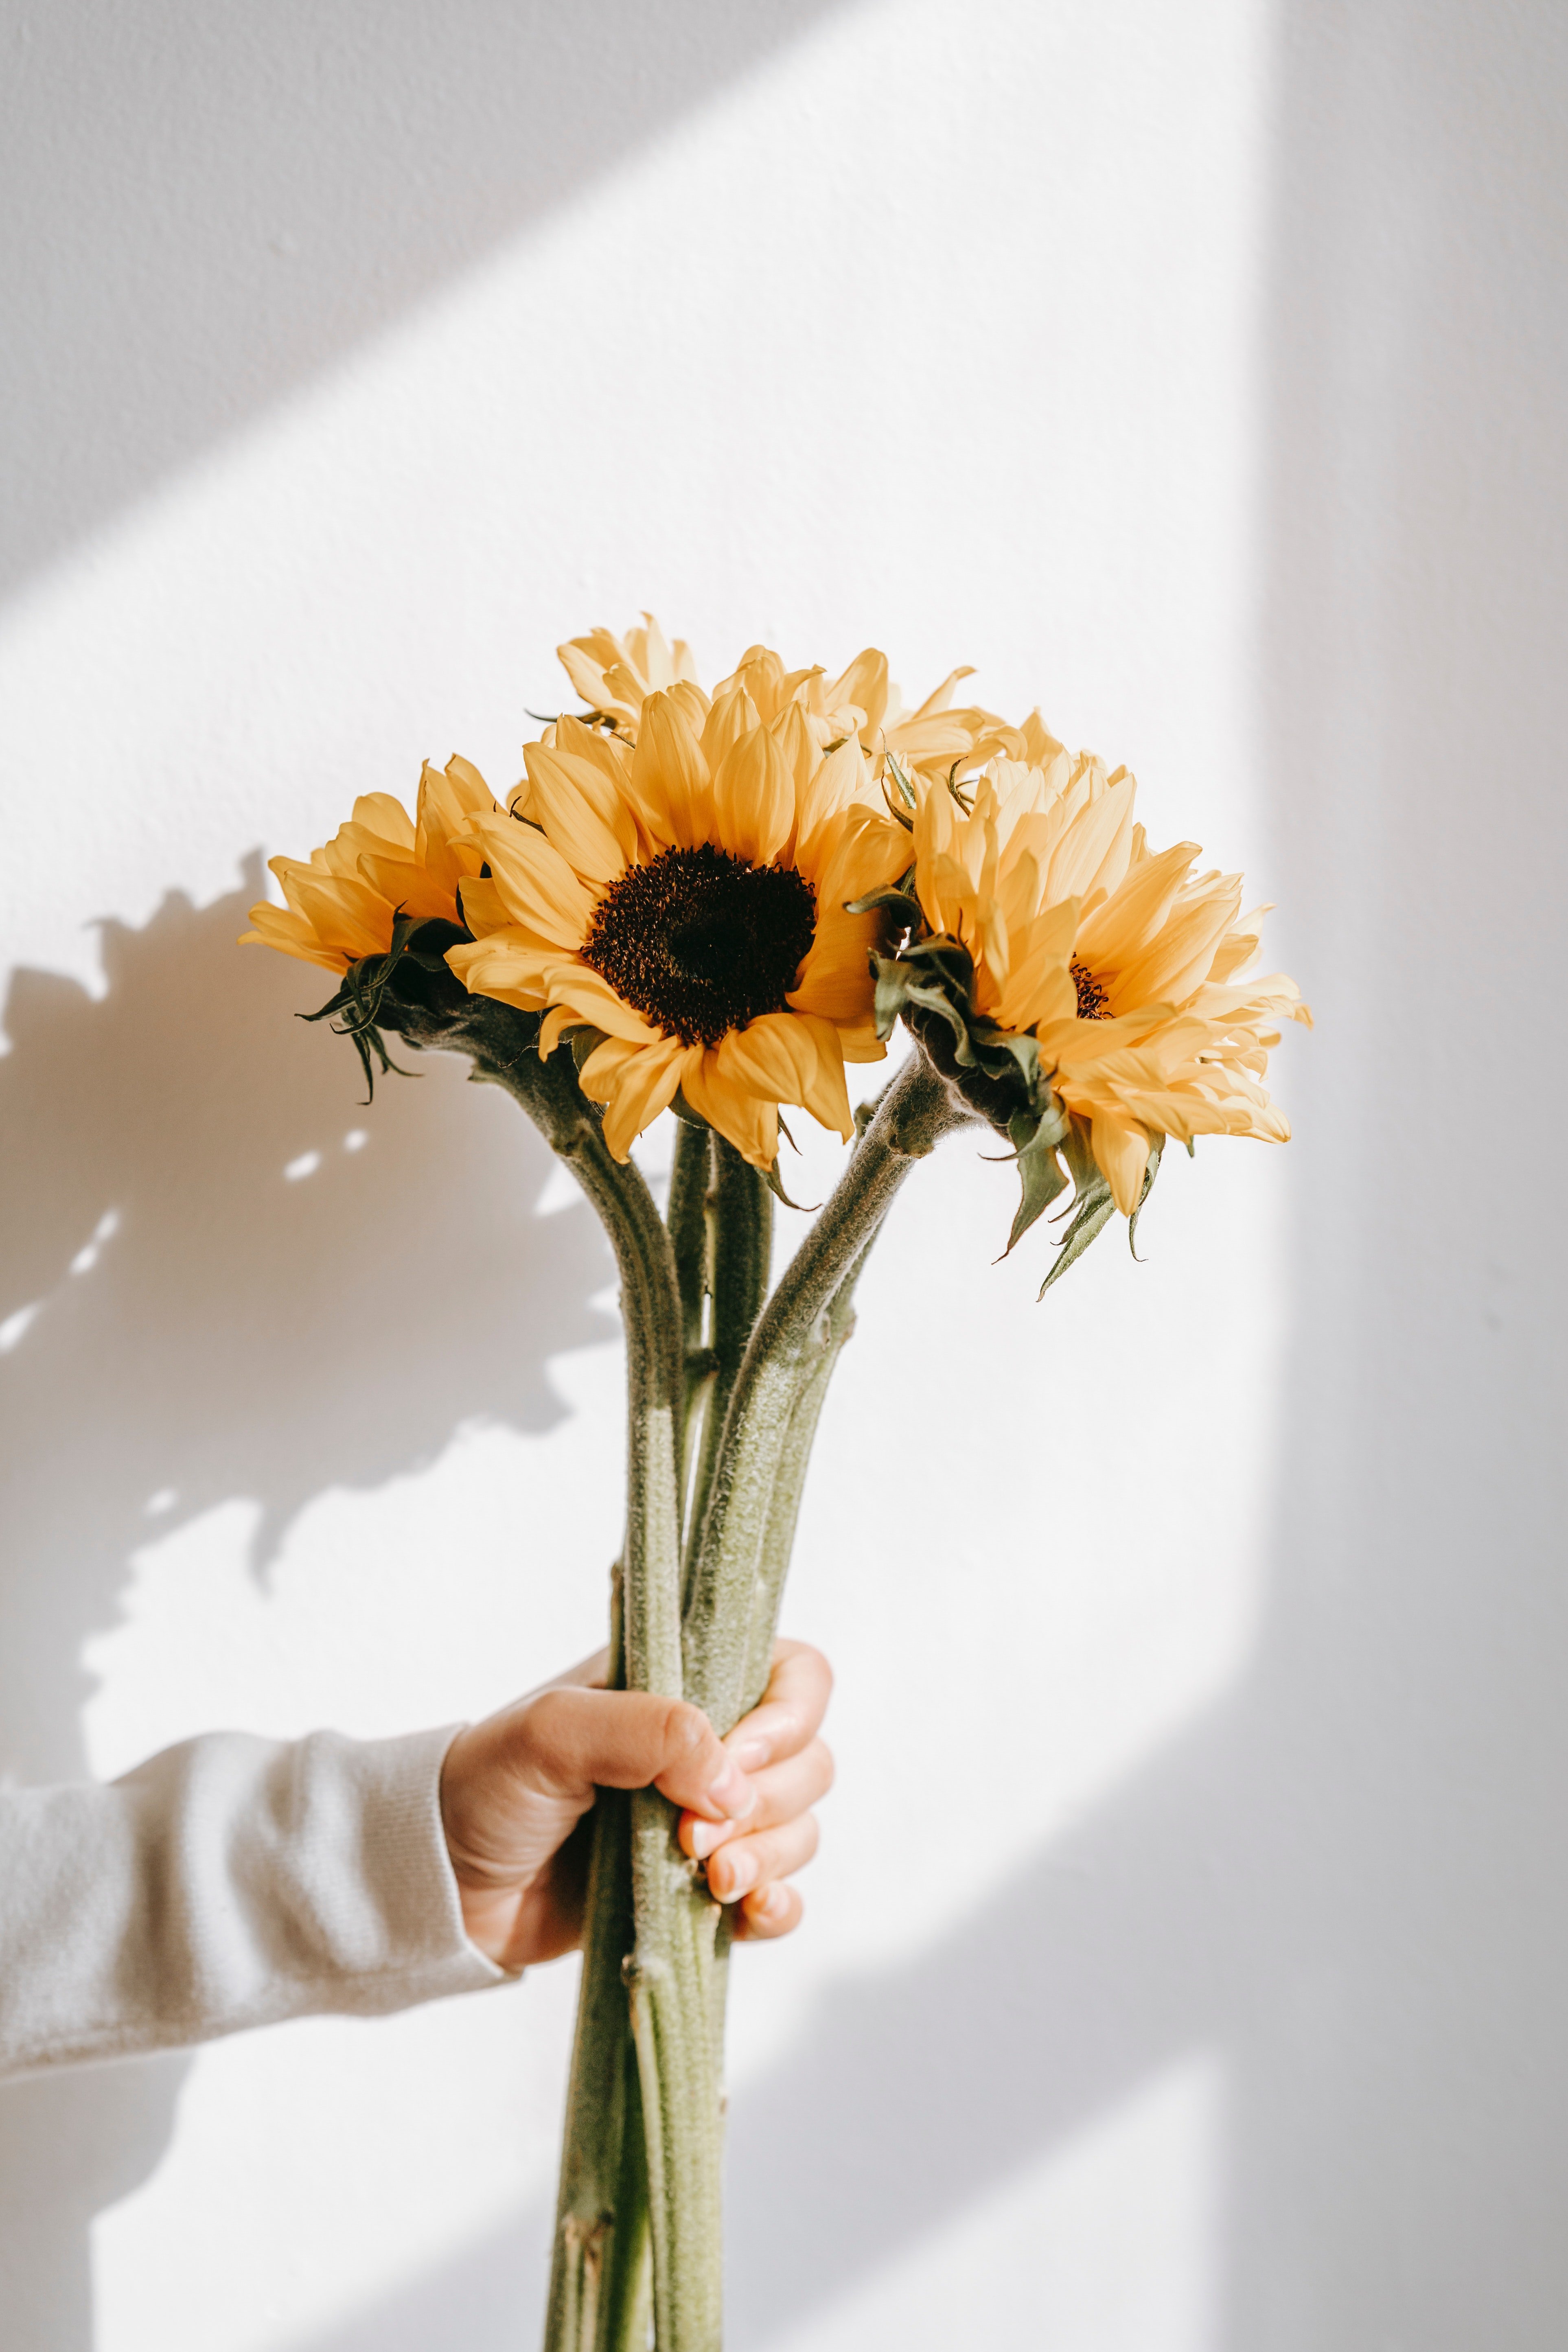 Josh tried to lure me into staying with him by giving me flowers | Photo: Pexels